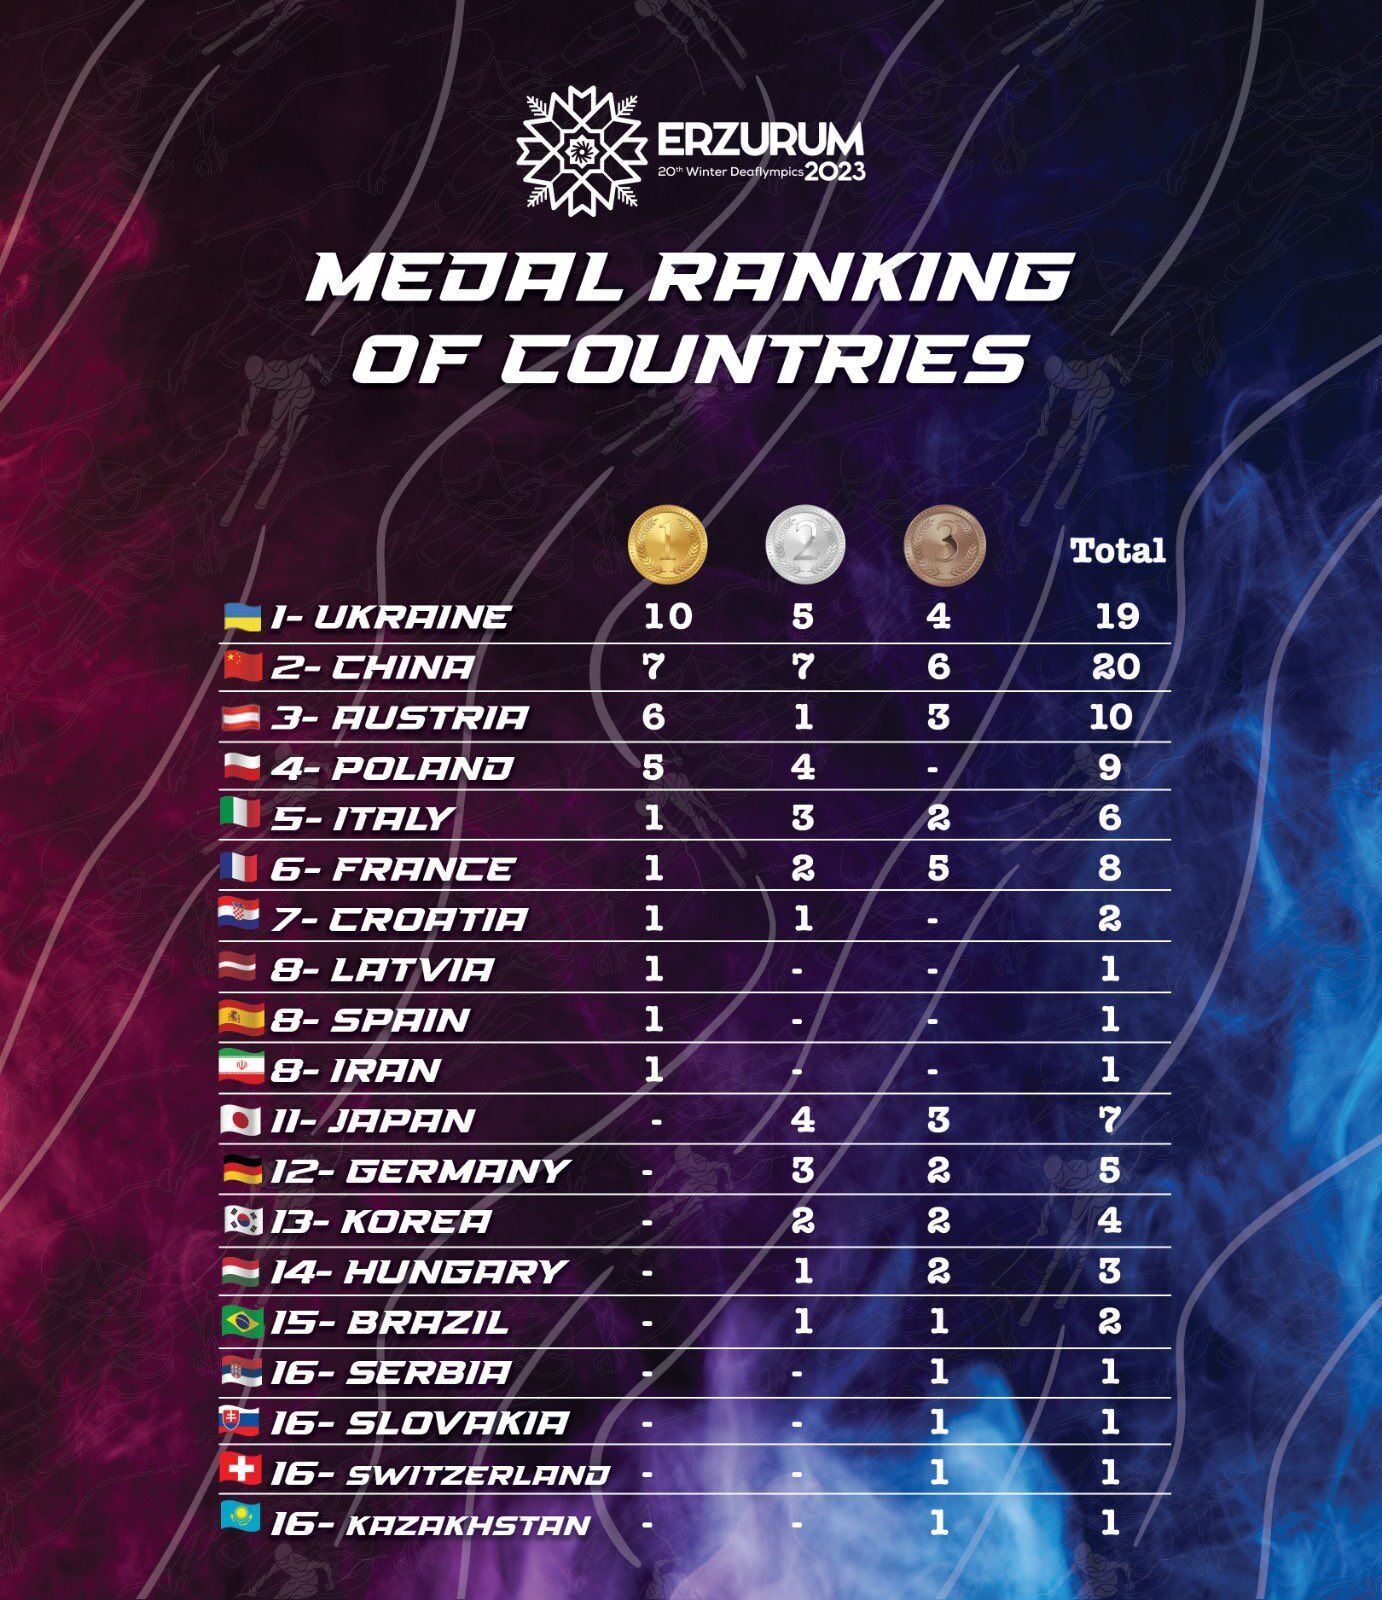 The best among all countries! Ukraine won the medal standings of the Winter Deaflympics for the first time in history